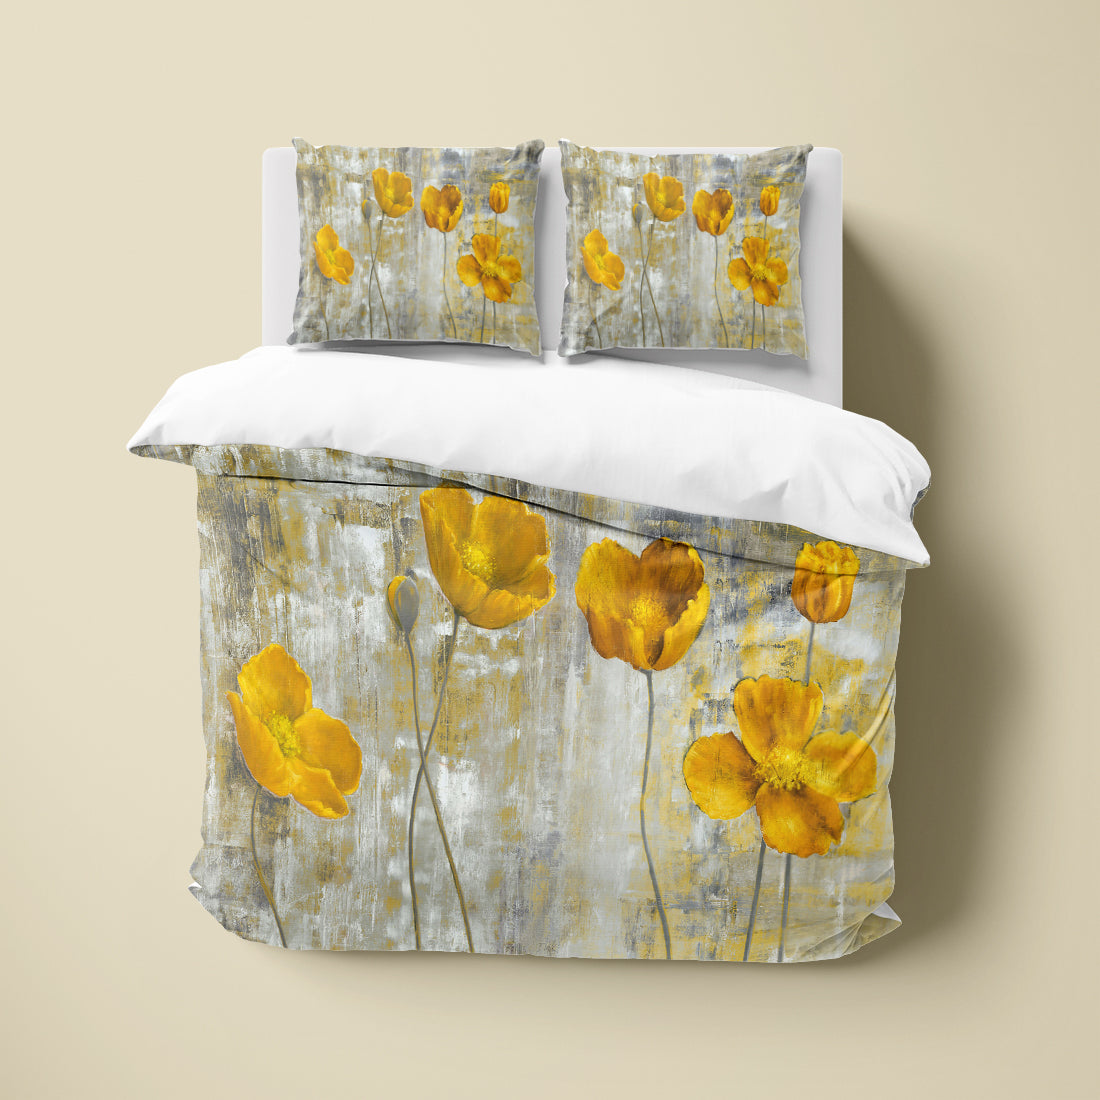 Flowers Painting Floral Yellow 3D Duvet Cover Set W Pillow Cover, Single Double Queen King Size, Printed Cotton Quilt Doona Cover 3 Pcs